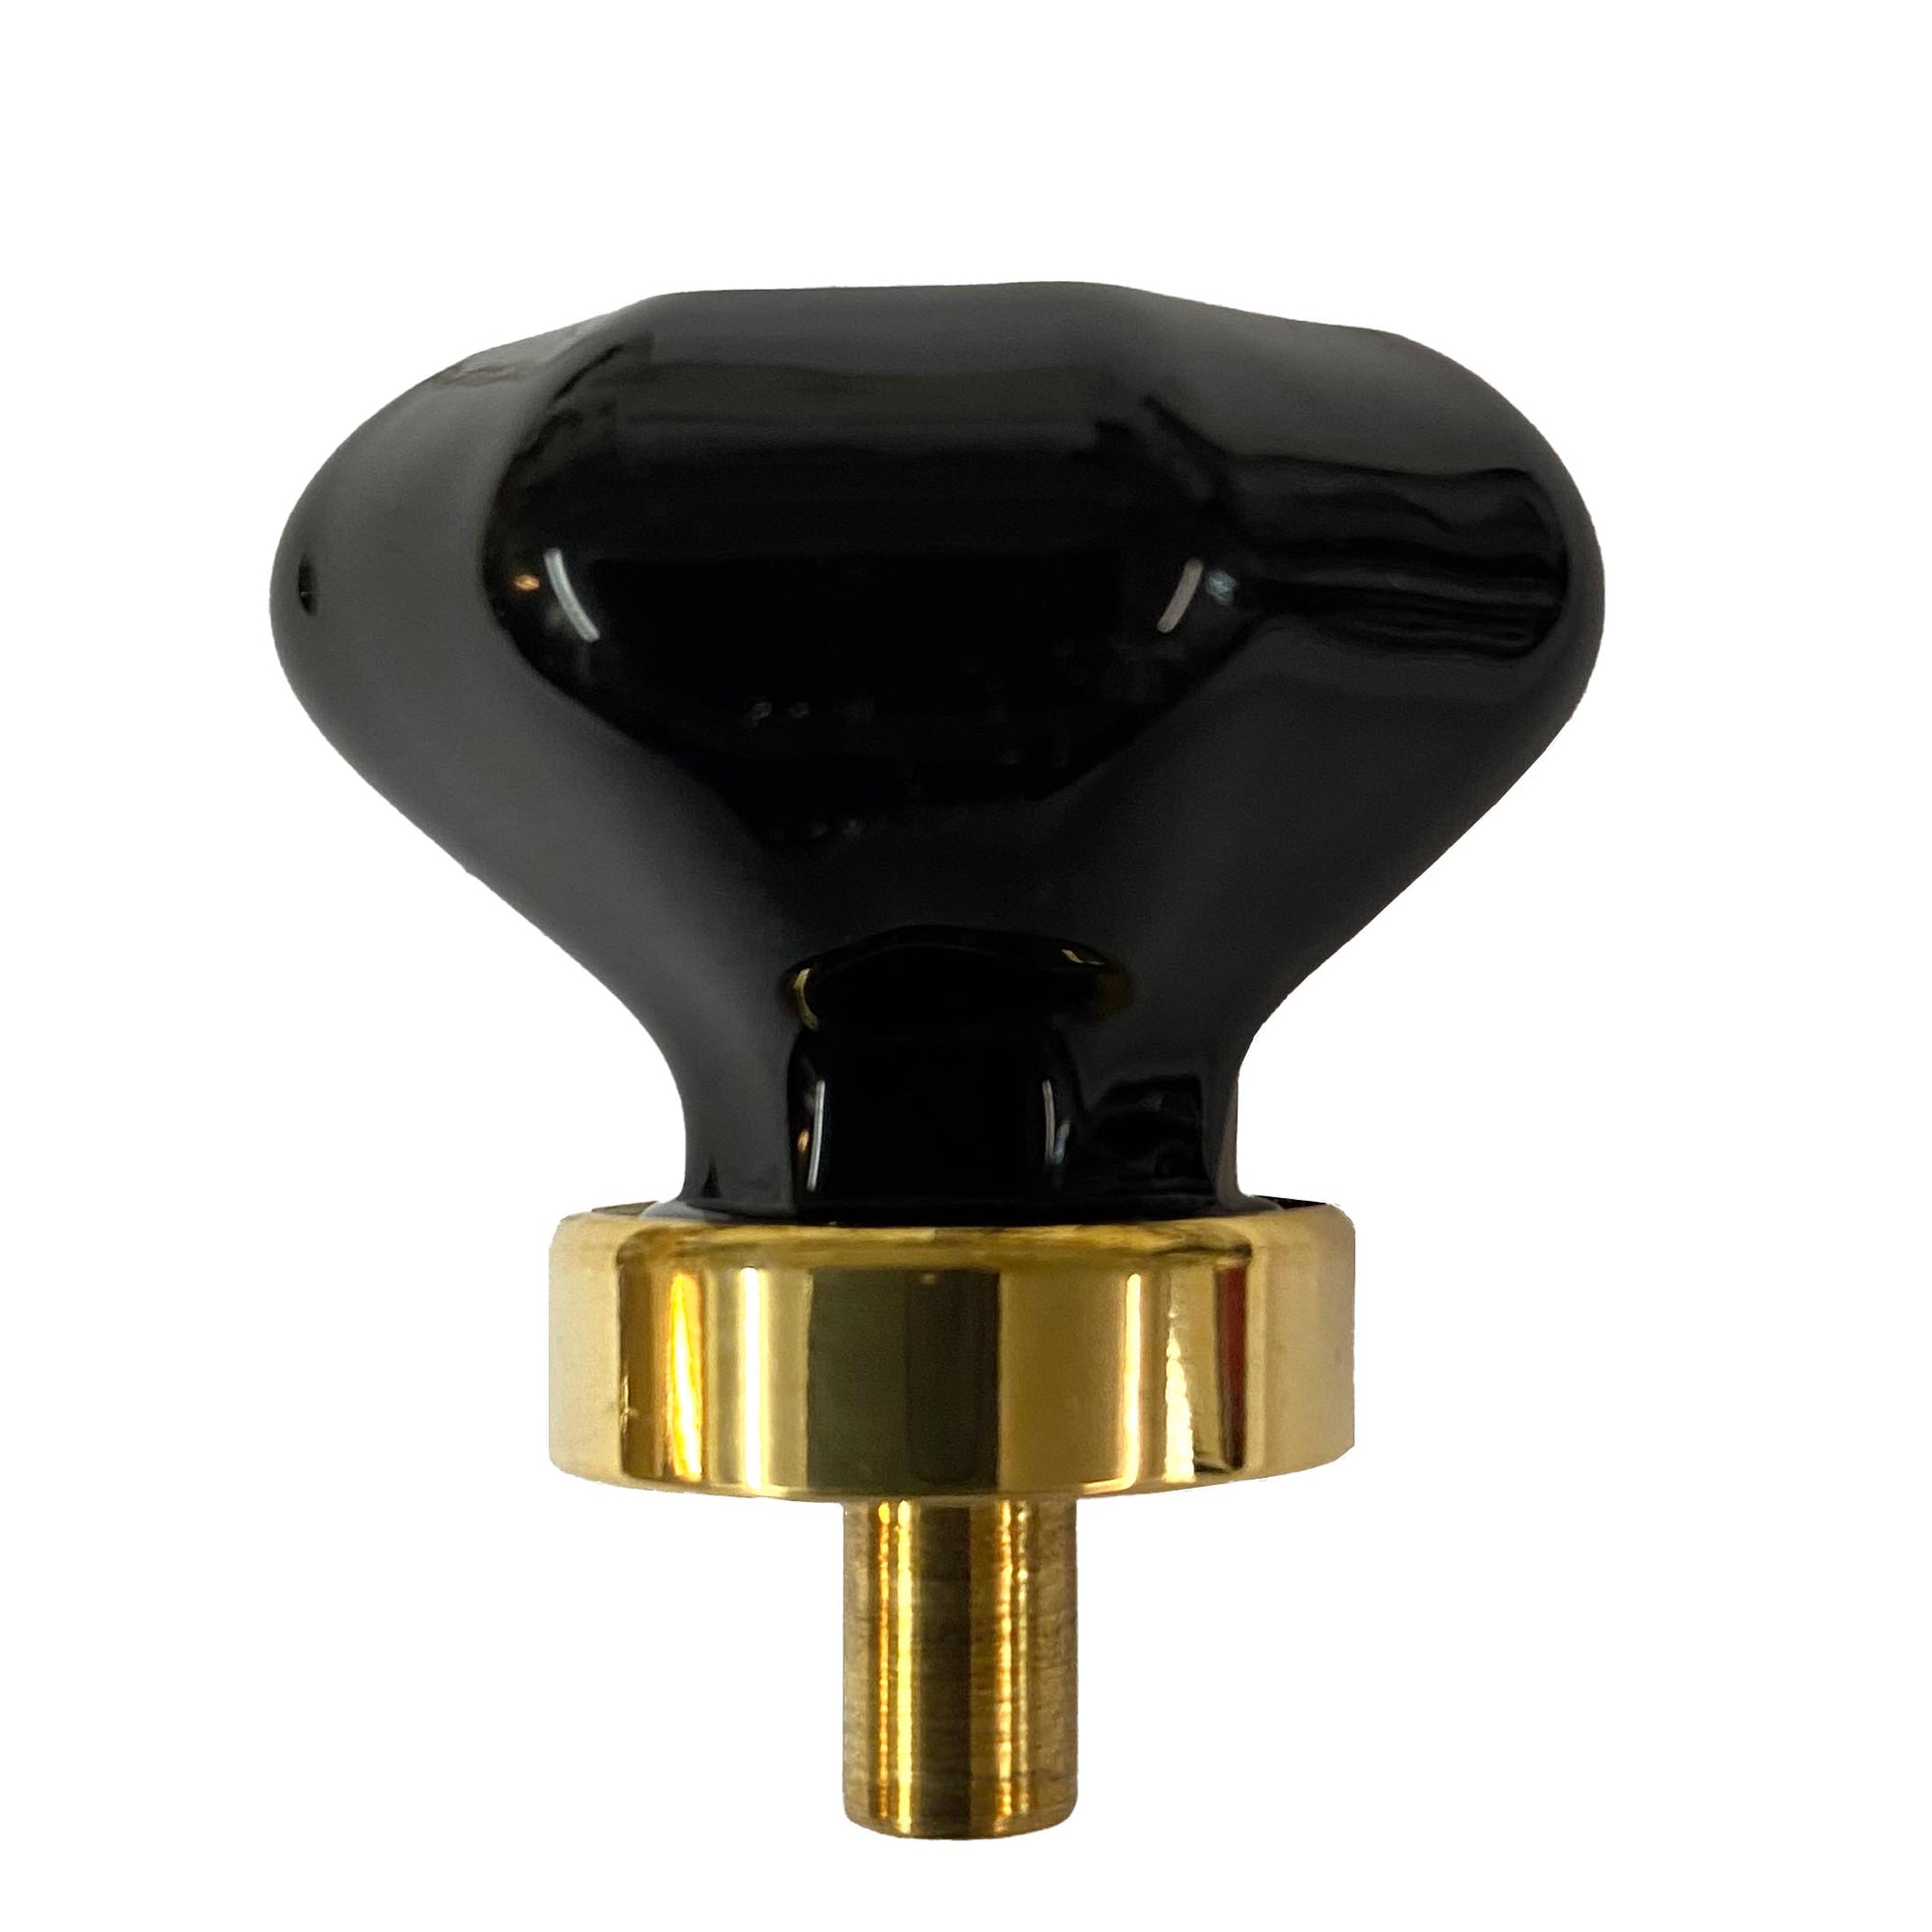 Large Black Glass Knobs with Brass Base - Paxton Hardware